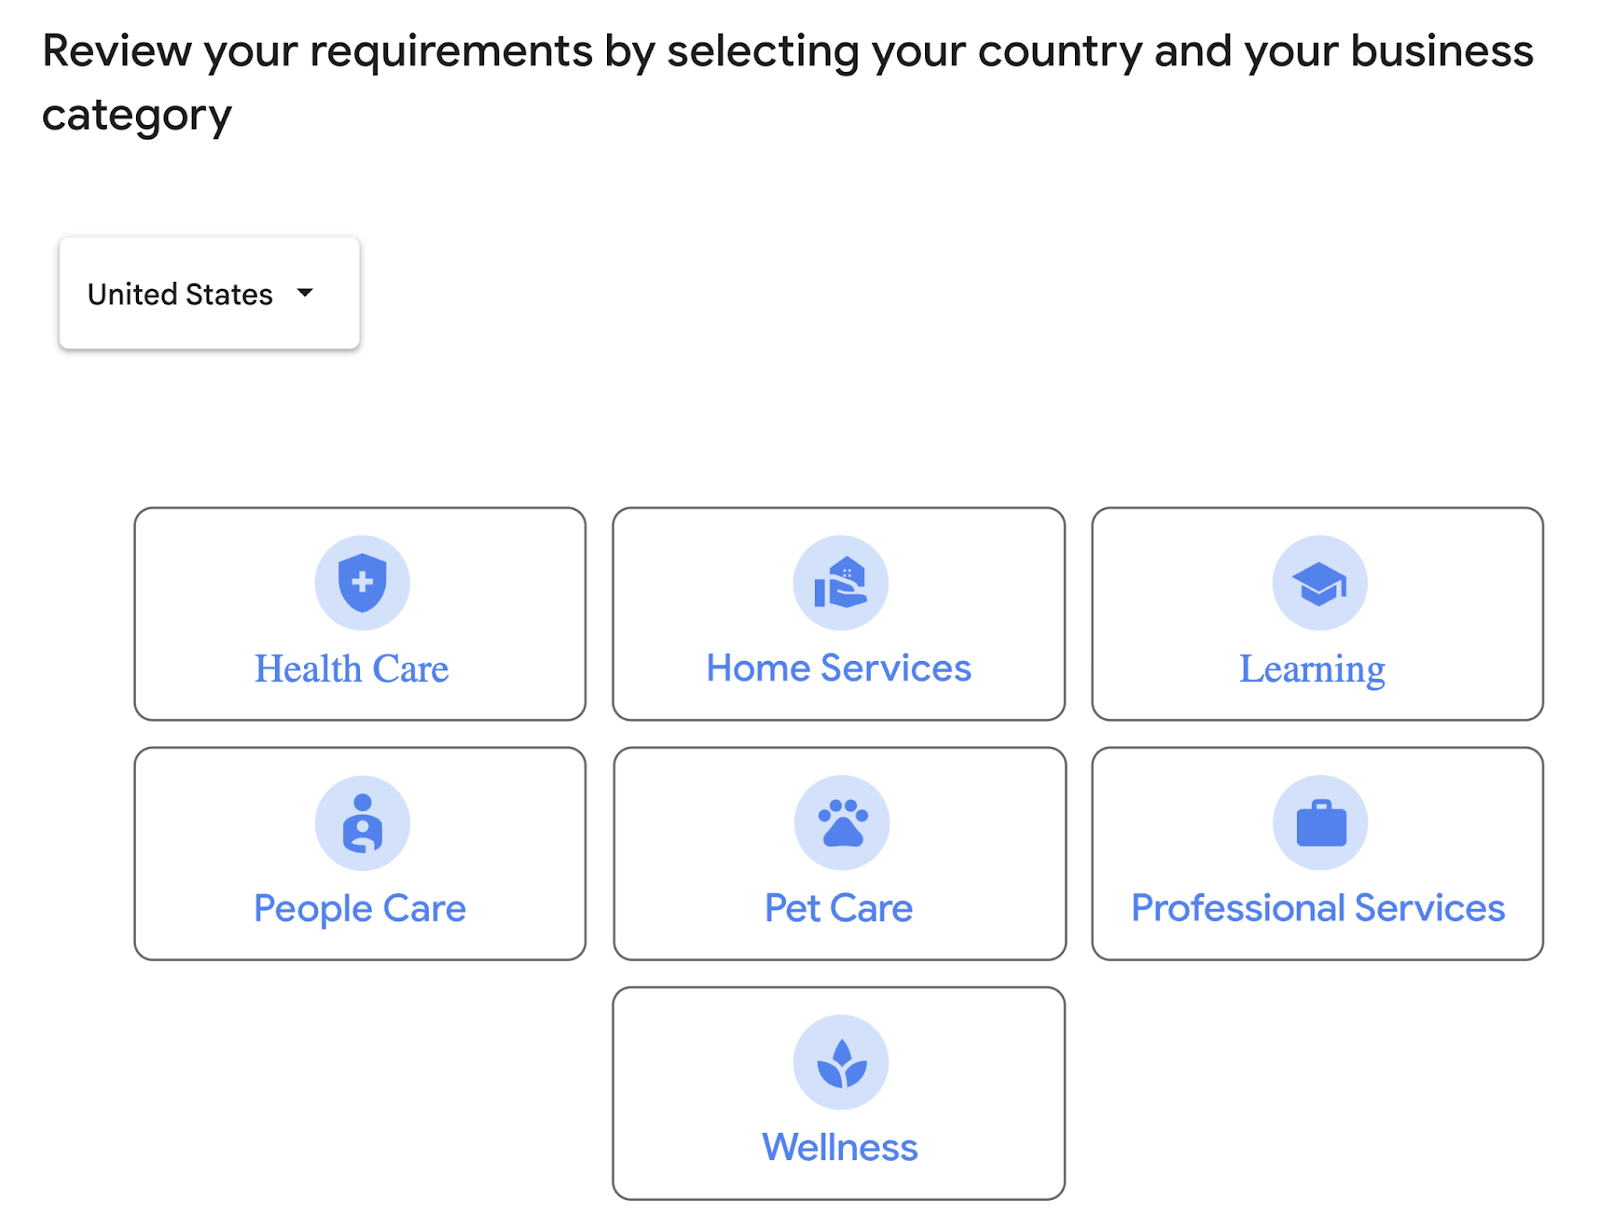 Google’s requirements page